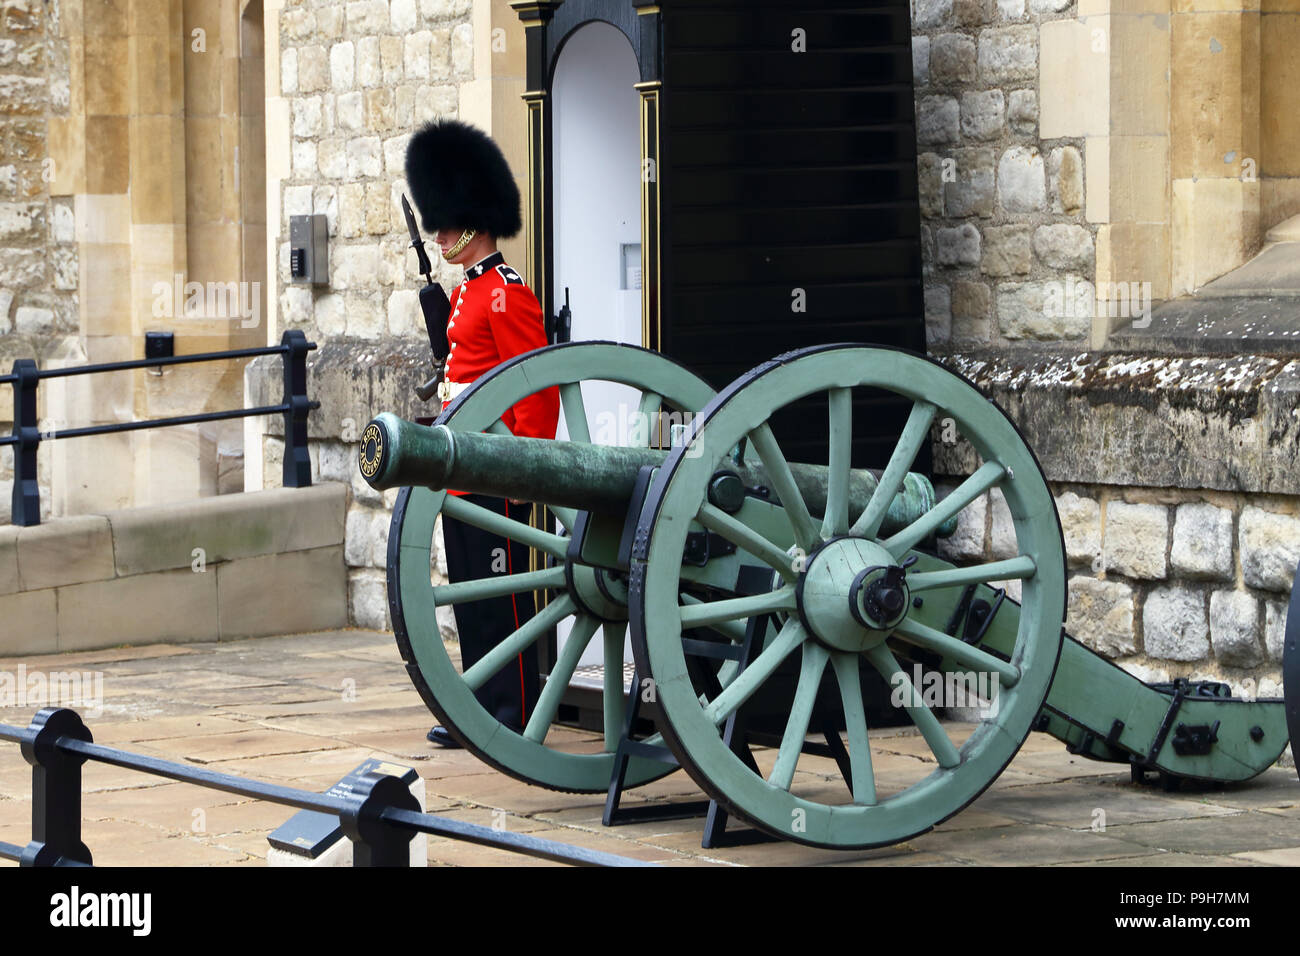 A member of the Queen's Guard stands sentinal at the Tower of London in London, England. Stock Photo